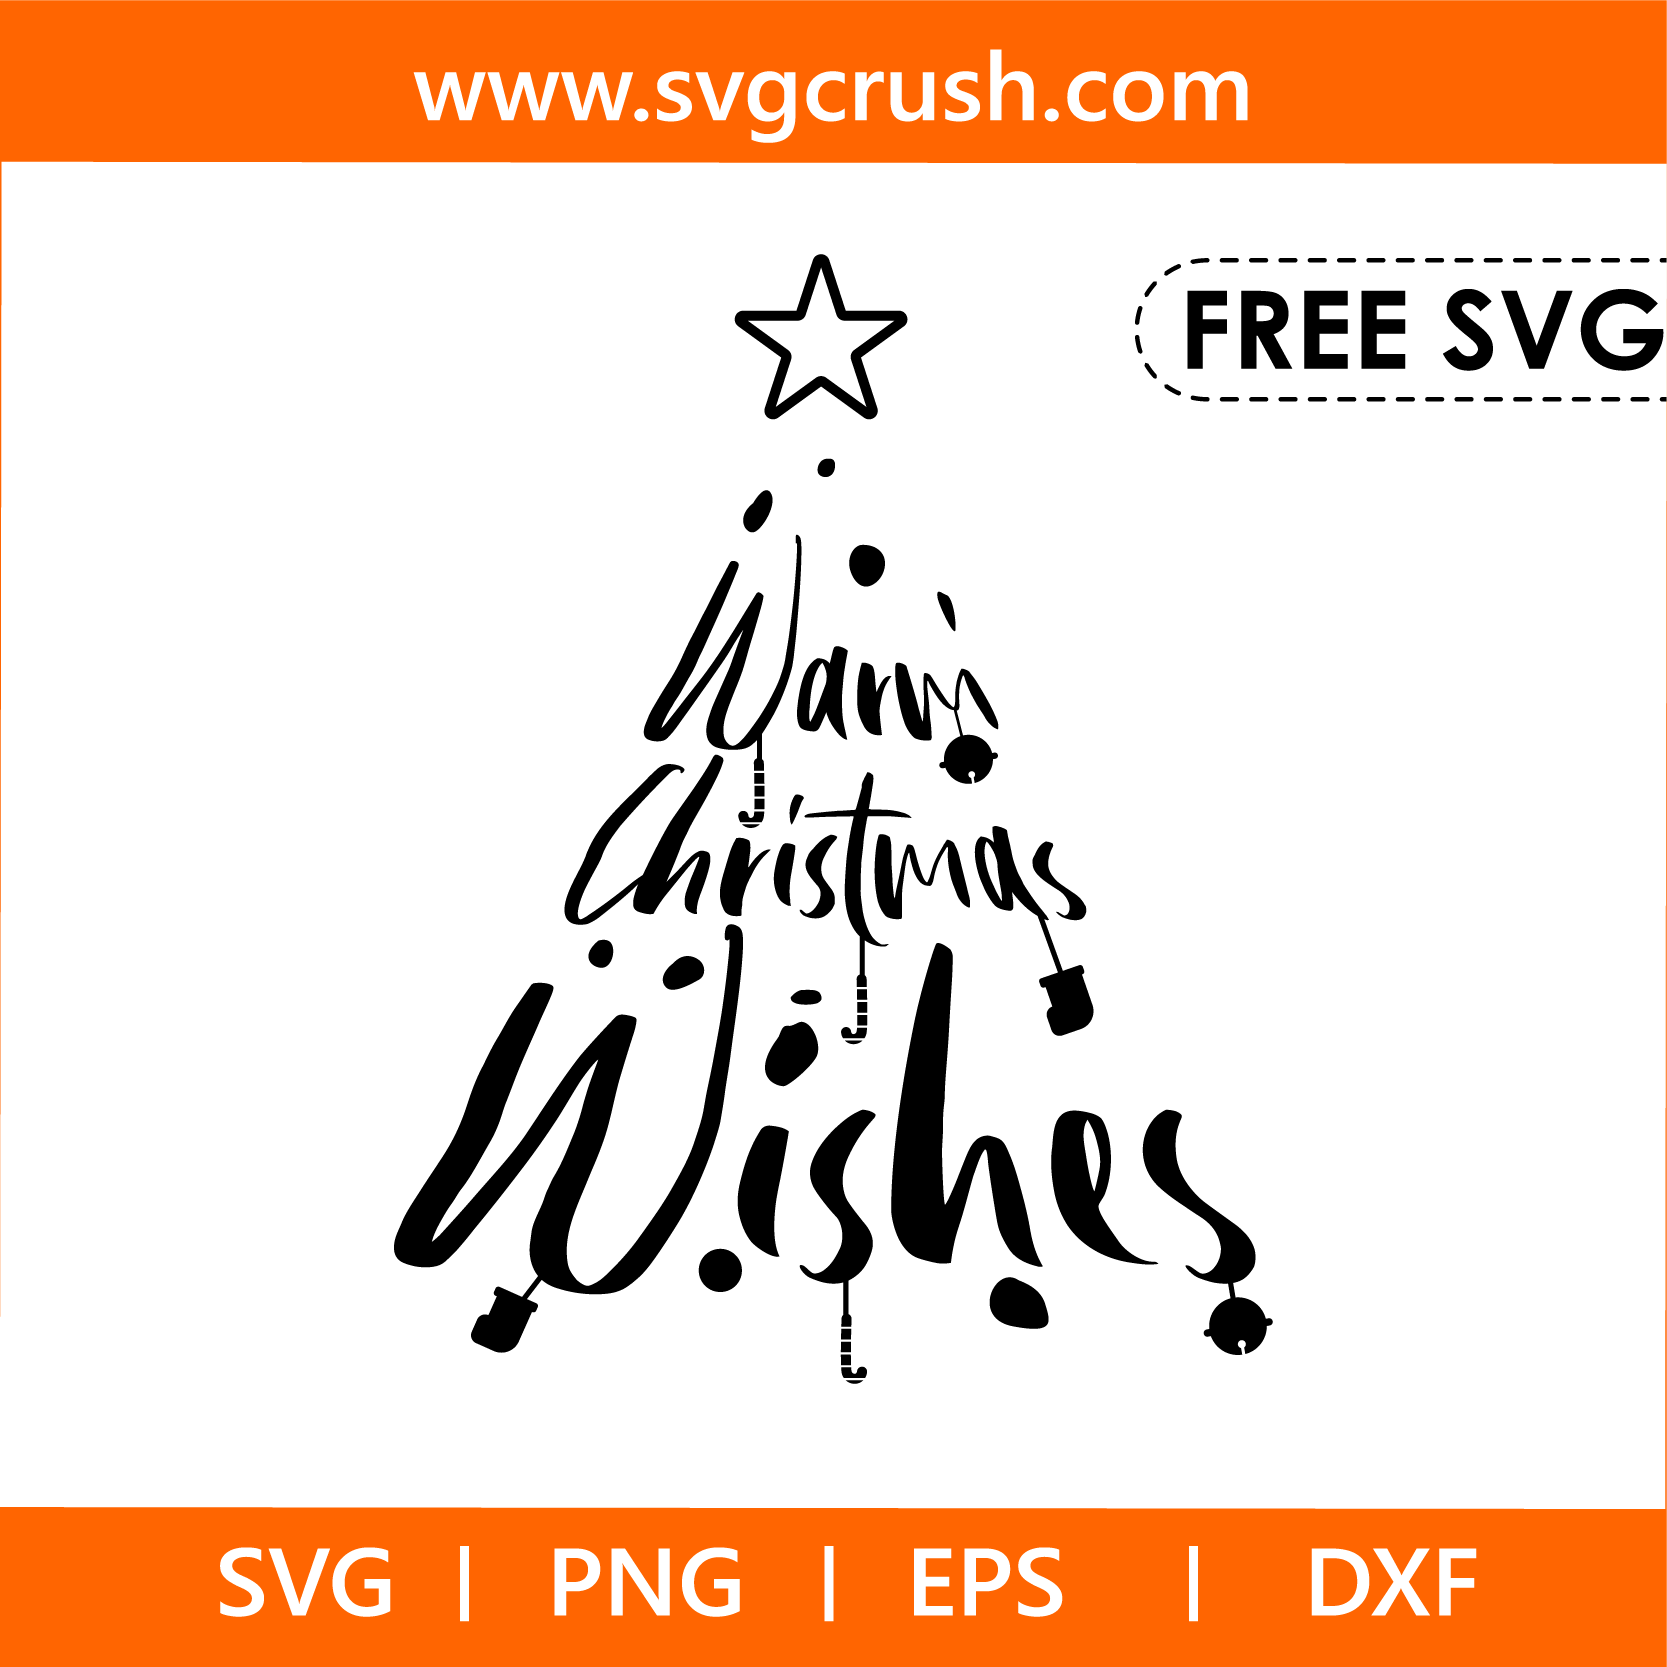 free warm-christmas-wishes-005 svg